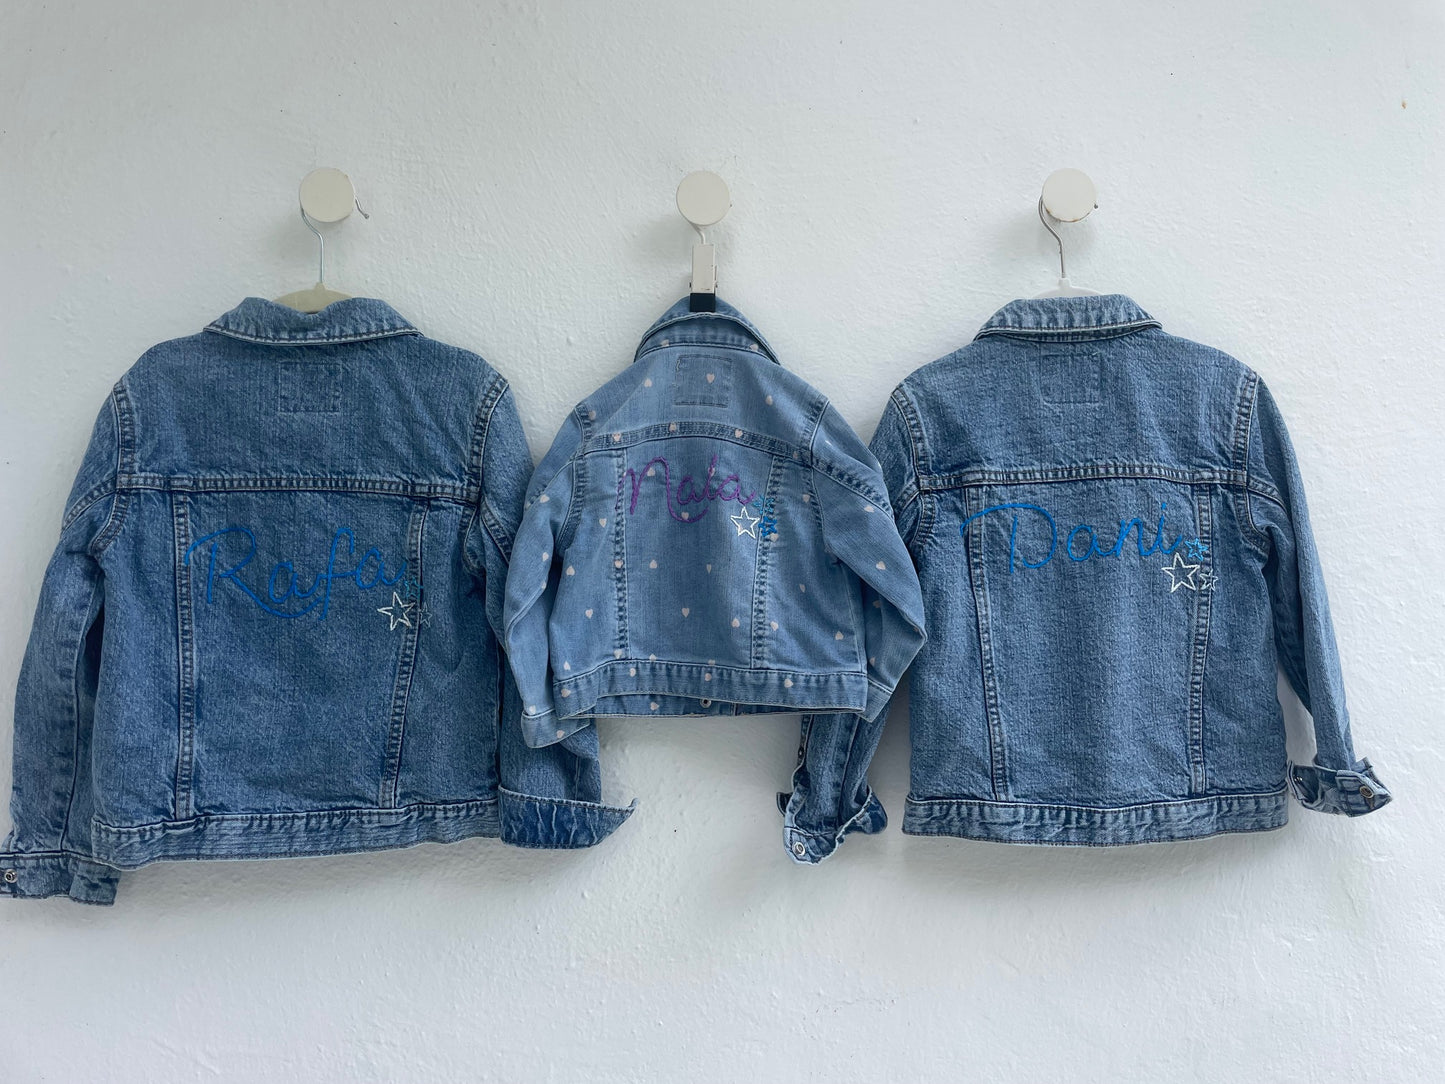 Jean Jacket - youth (hand embroidered)